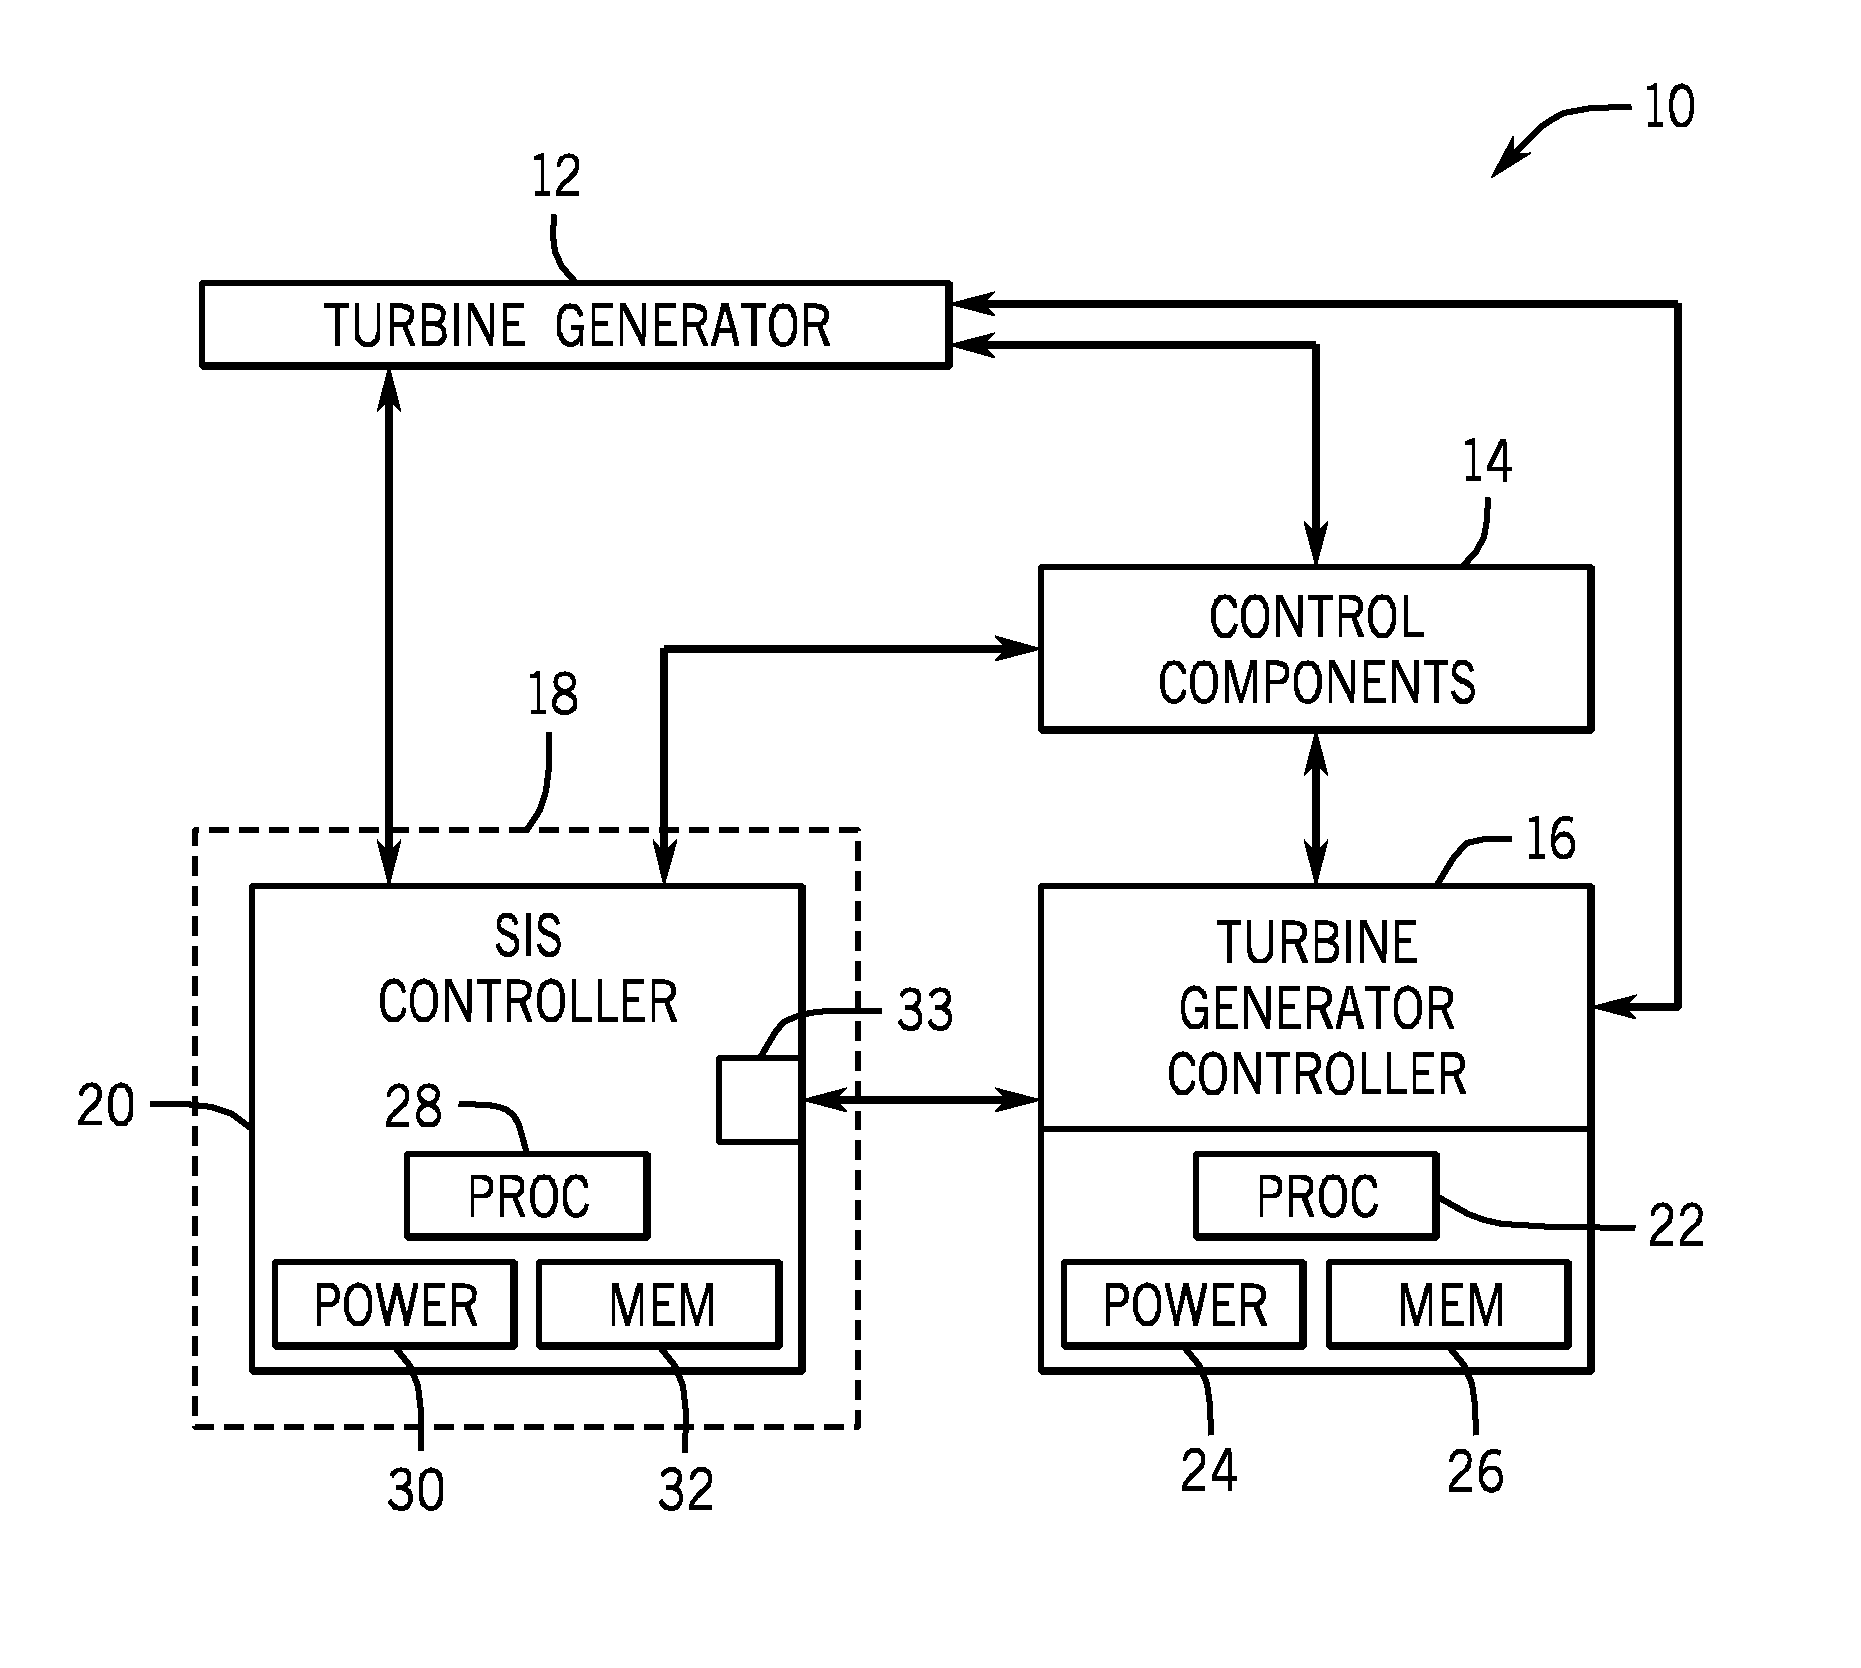 Safety instrumented system (SIS) for a turbine system